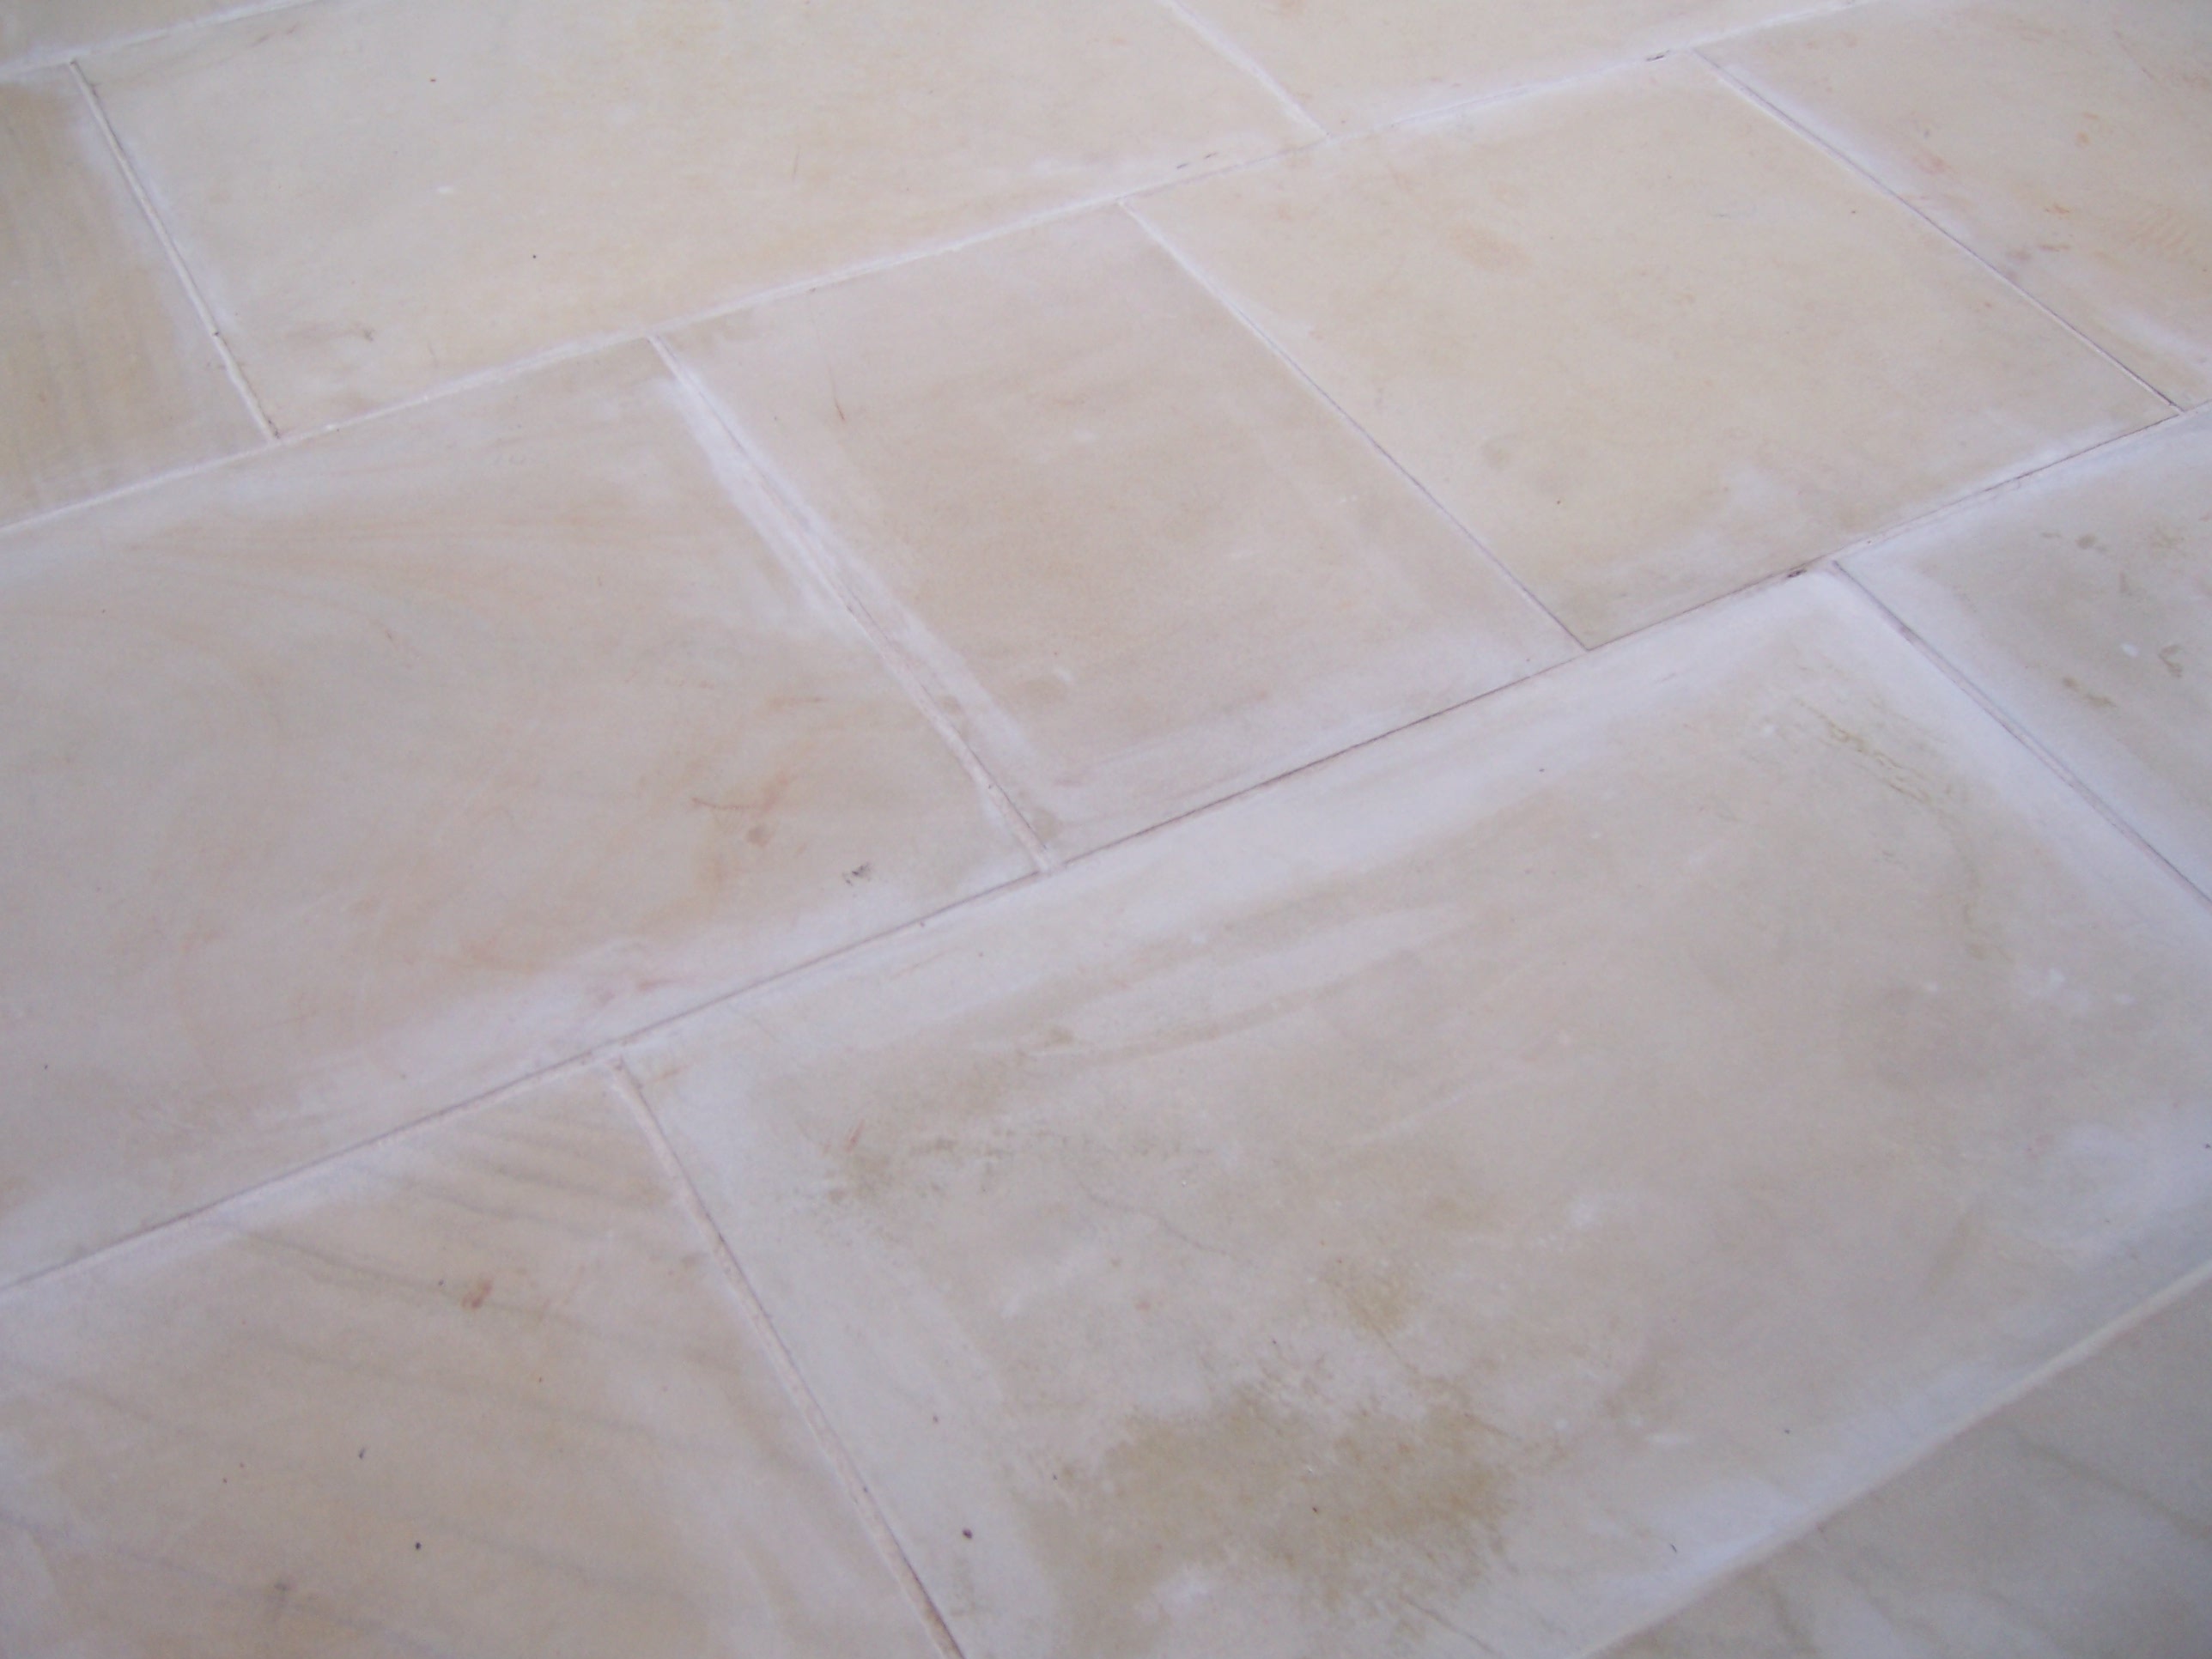 Removing Mortar Stains From Sandstone, How To Get Cement Stains Off Patio Slabs